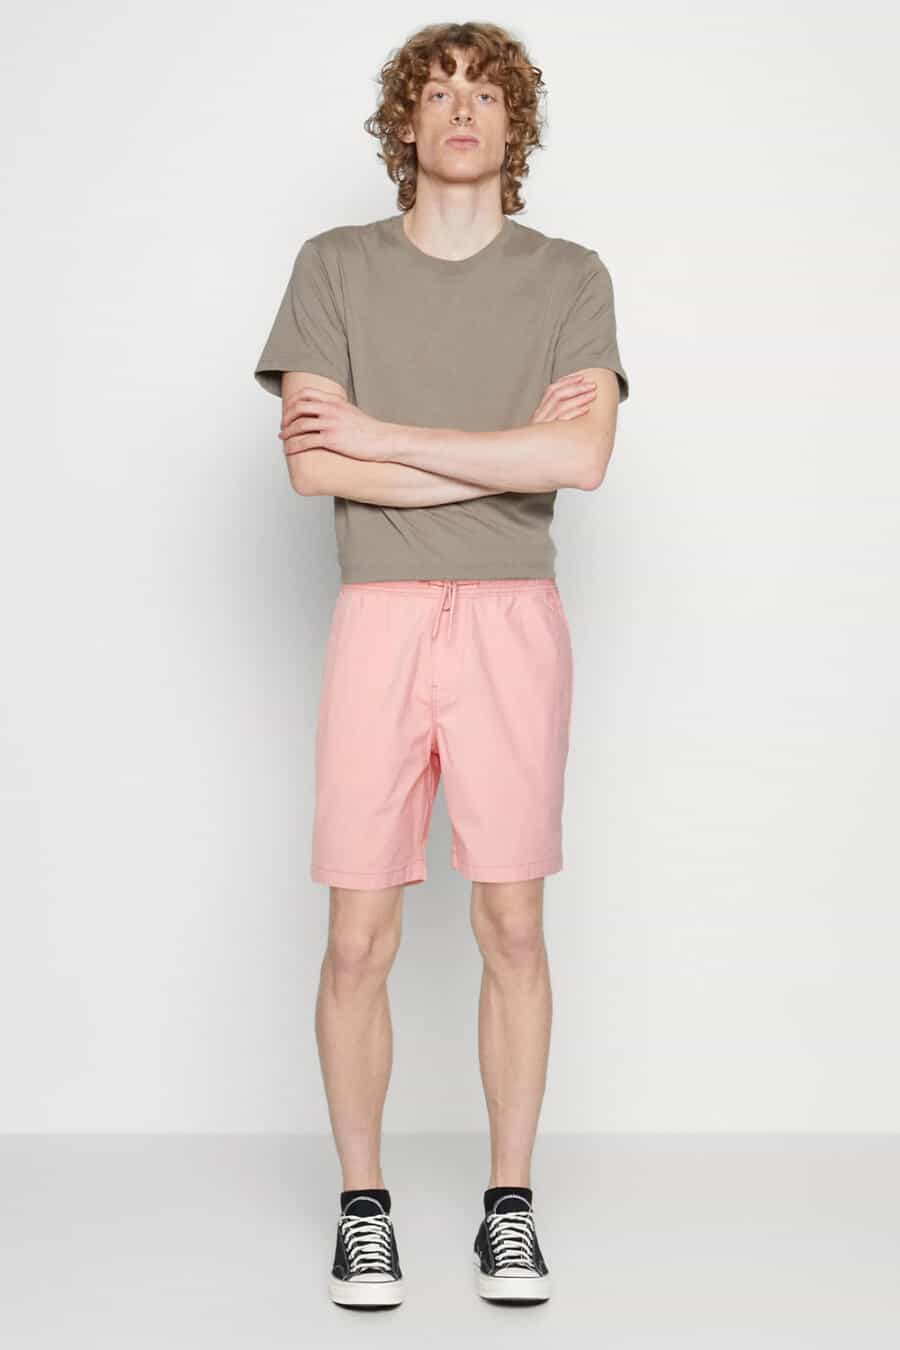 Men's light pink drawstring shorts, clay grey T-shirt and black canvas high-top sneakers outfit